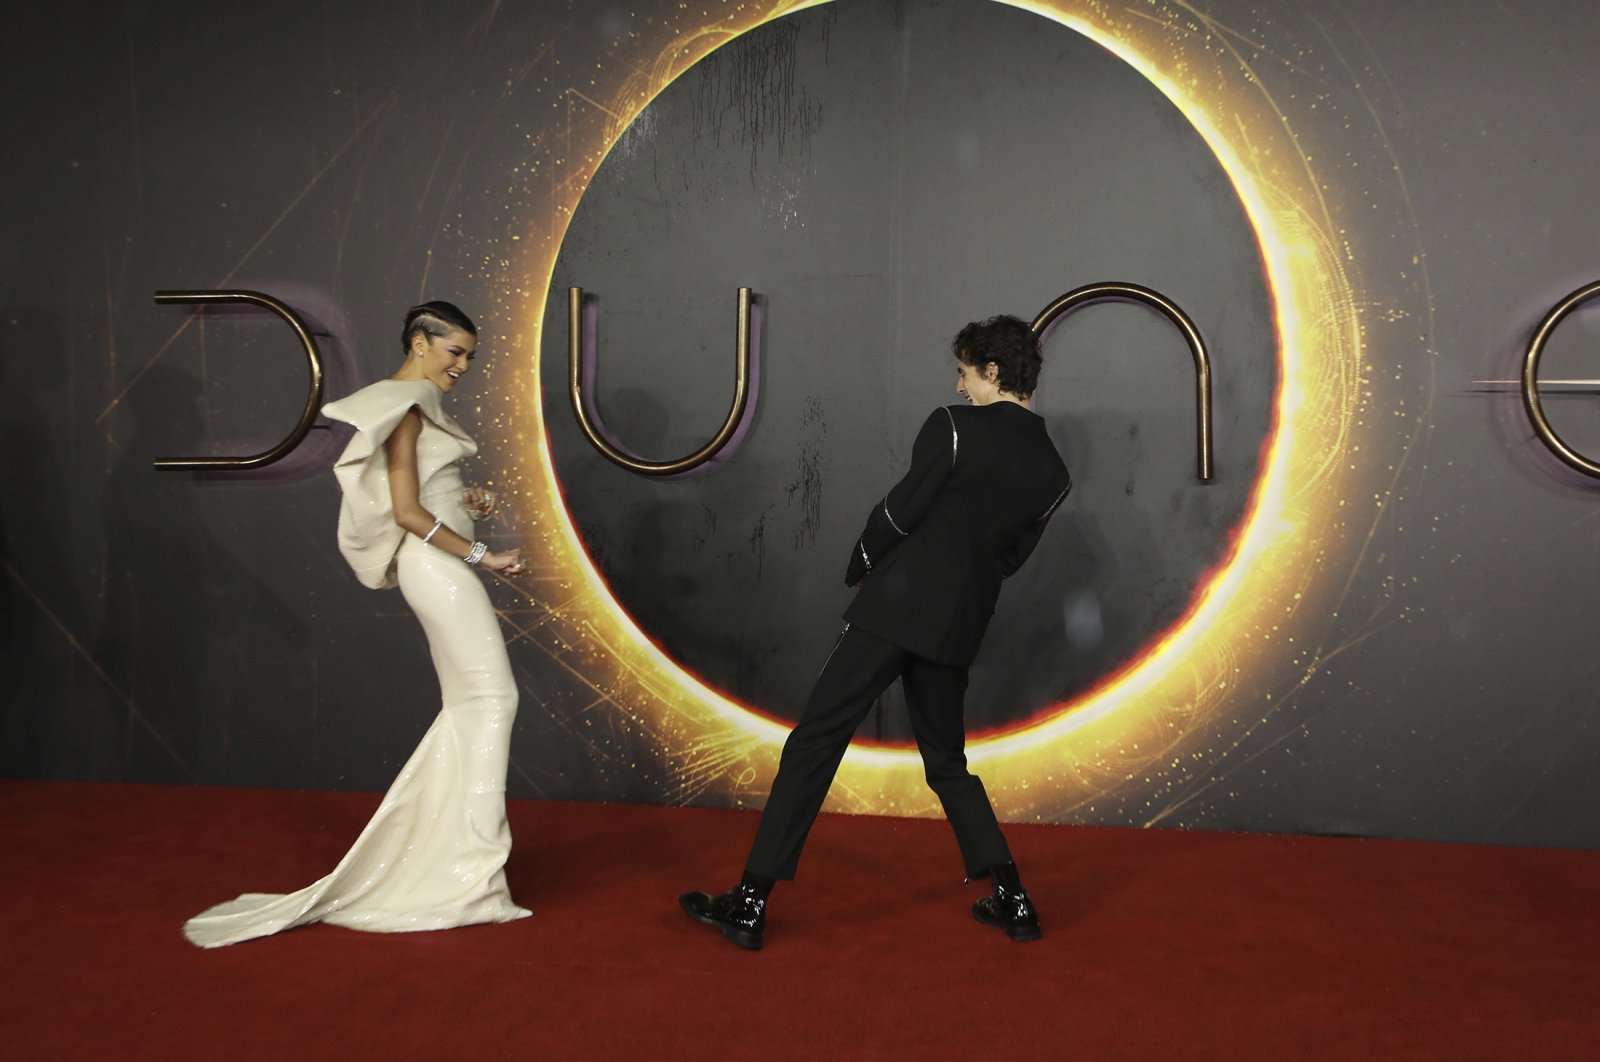 Zendaya (L) and Timothee Chalamet pose for photographers upon arrival at the premiere of the film "Dune," in London, U.K., Oct. 18, 2021. (AP Photo)